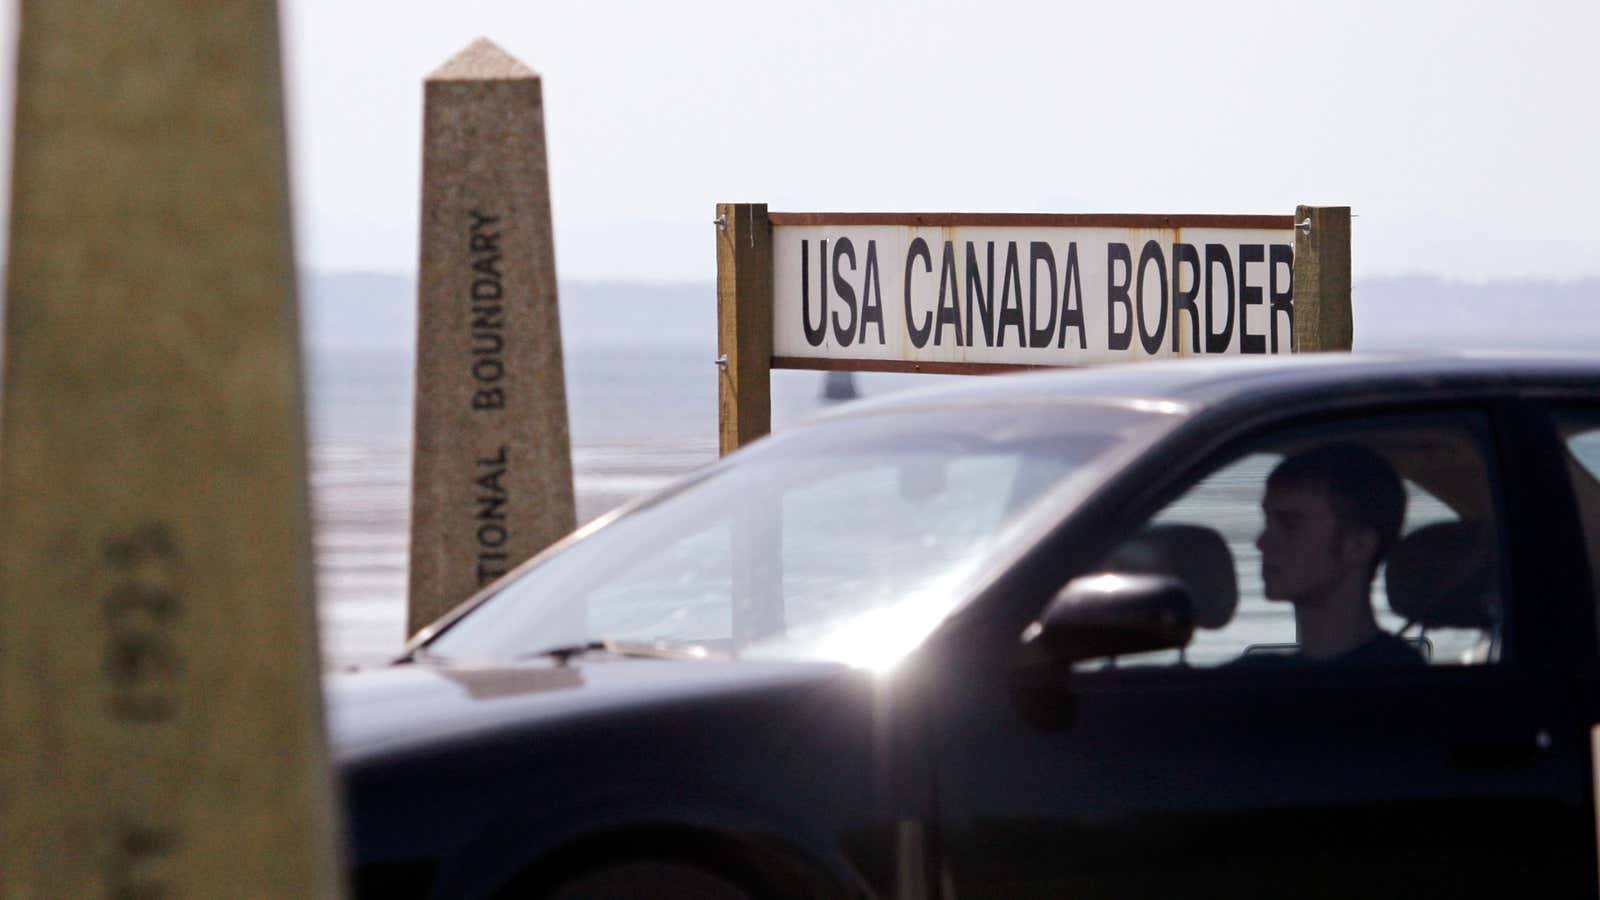 Getting dual citizenship makes border crossing easier.